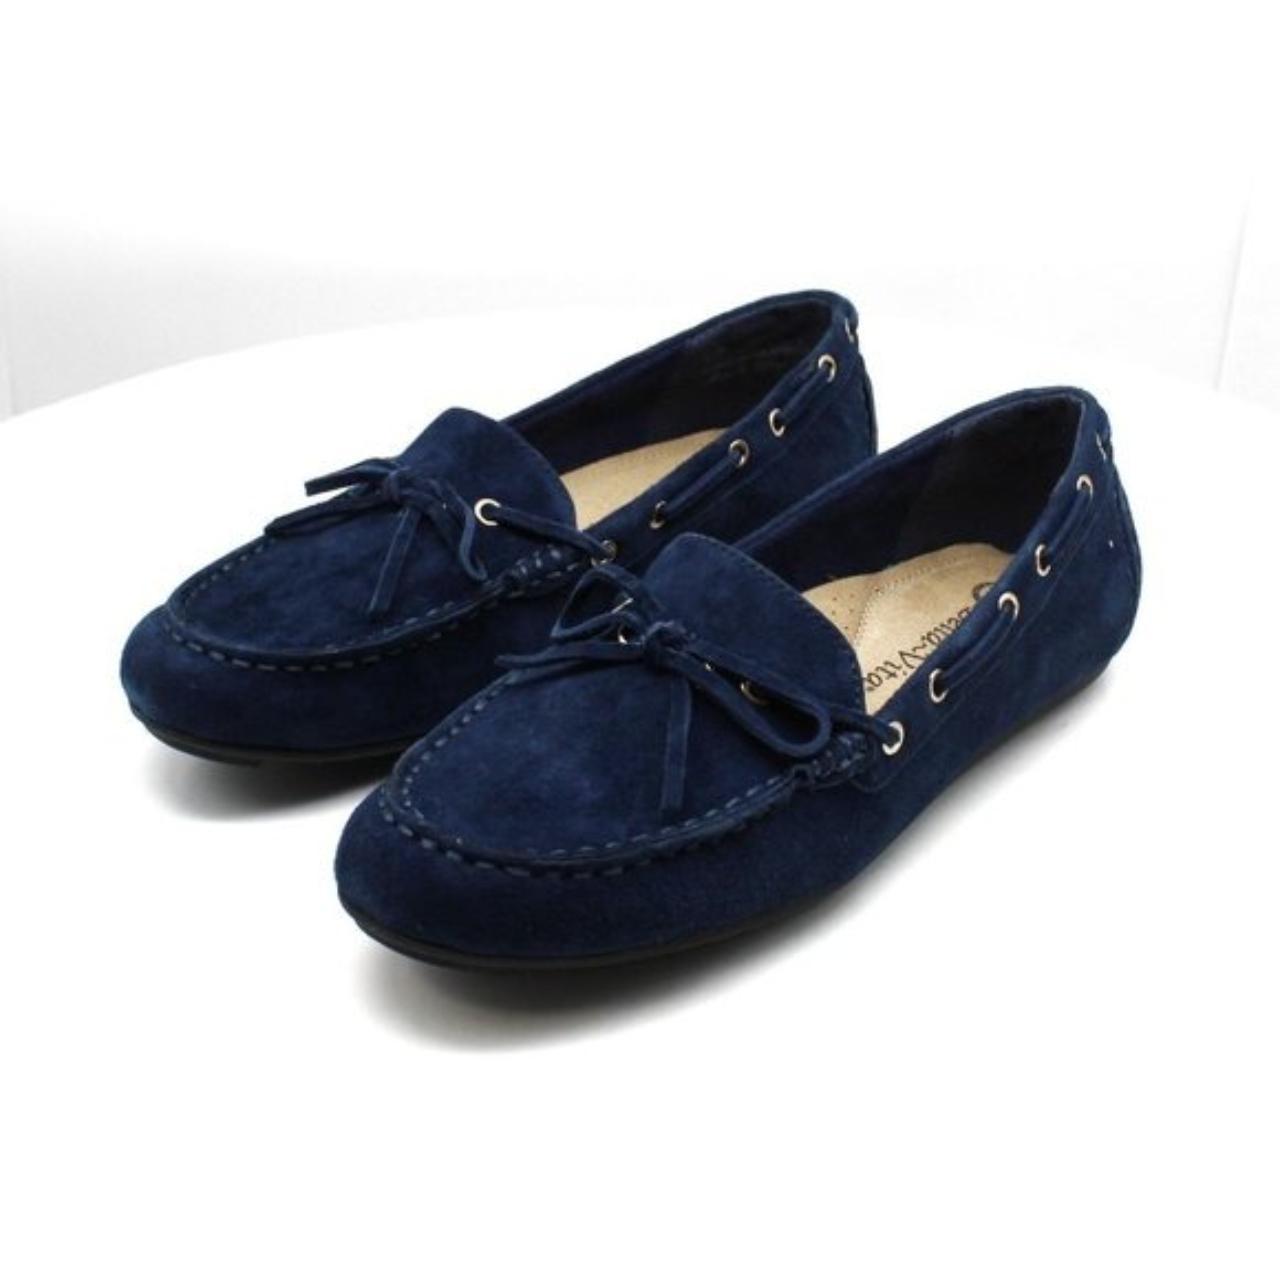 Bella Vita Scout Comfort Loafers Women's Shoes The... - Depop